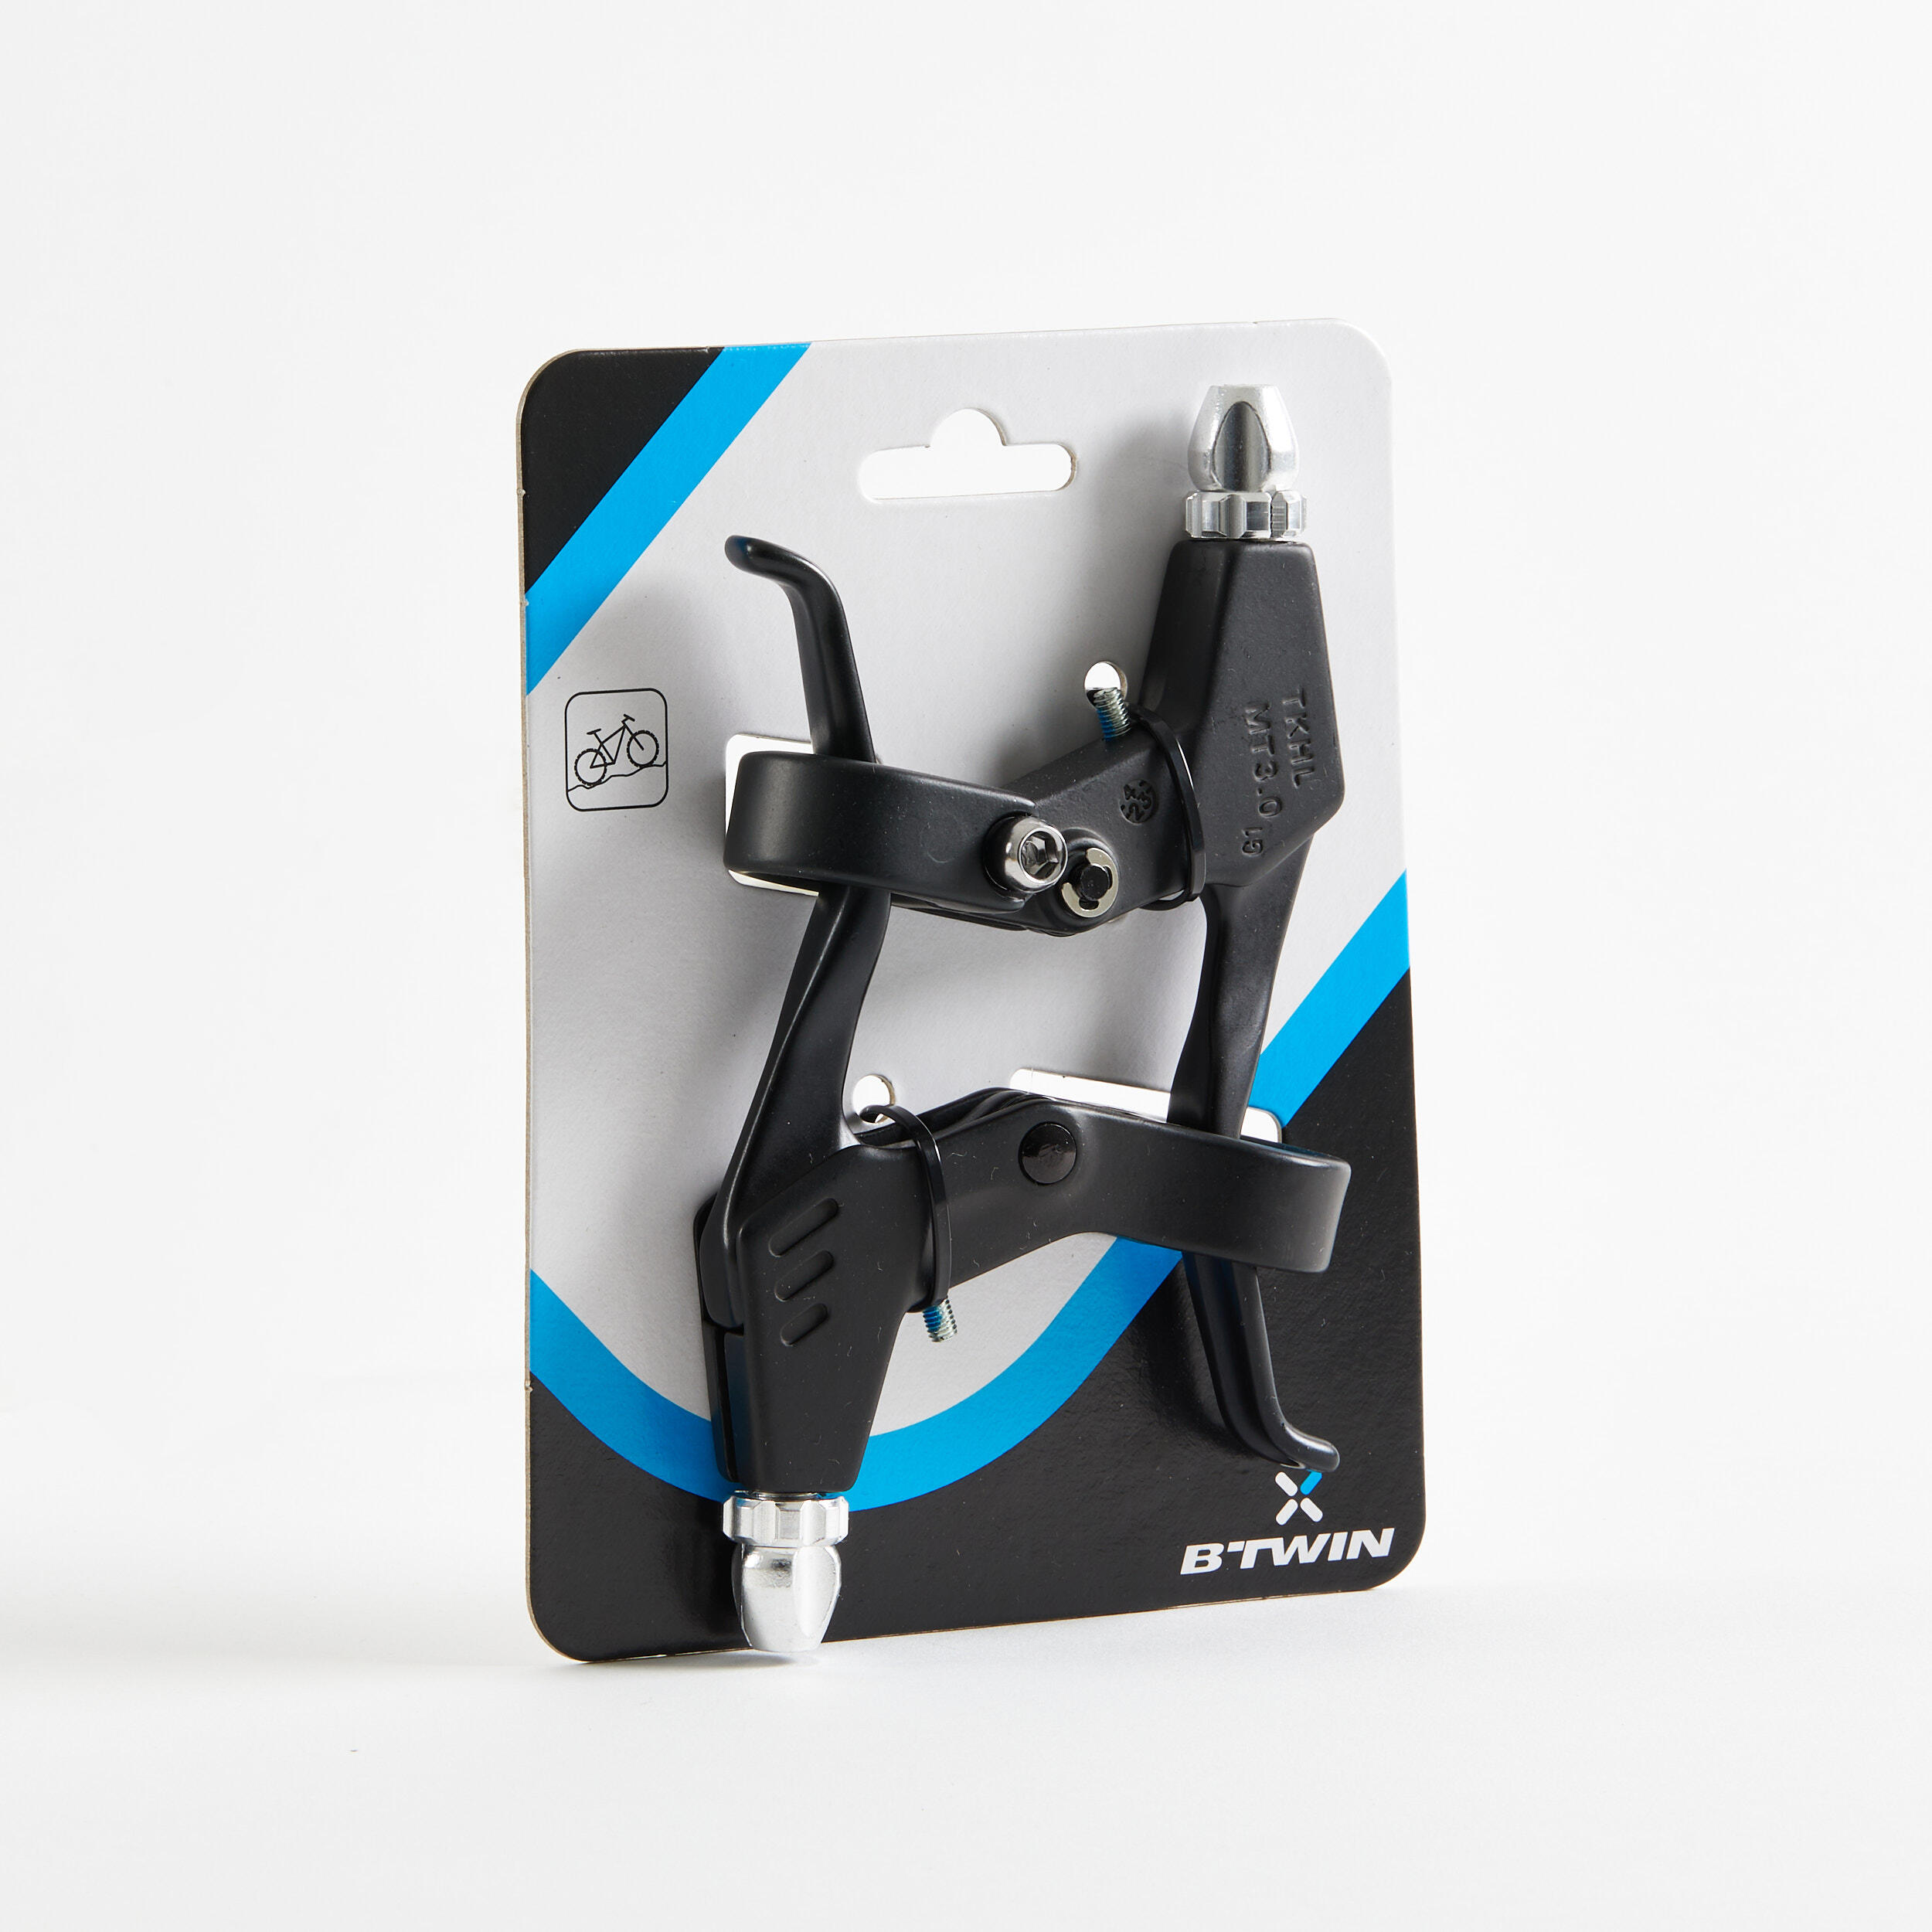 B'TWIN Cycle Spare Parts and Maintenance All Sports Cycling Bikes Brakes and Brake Pads